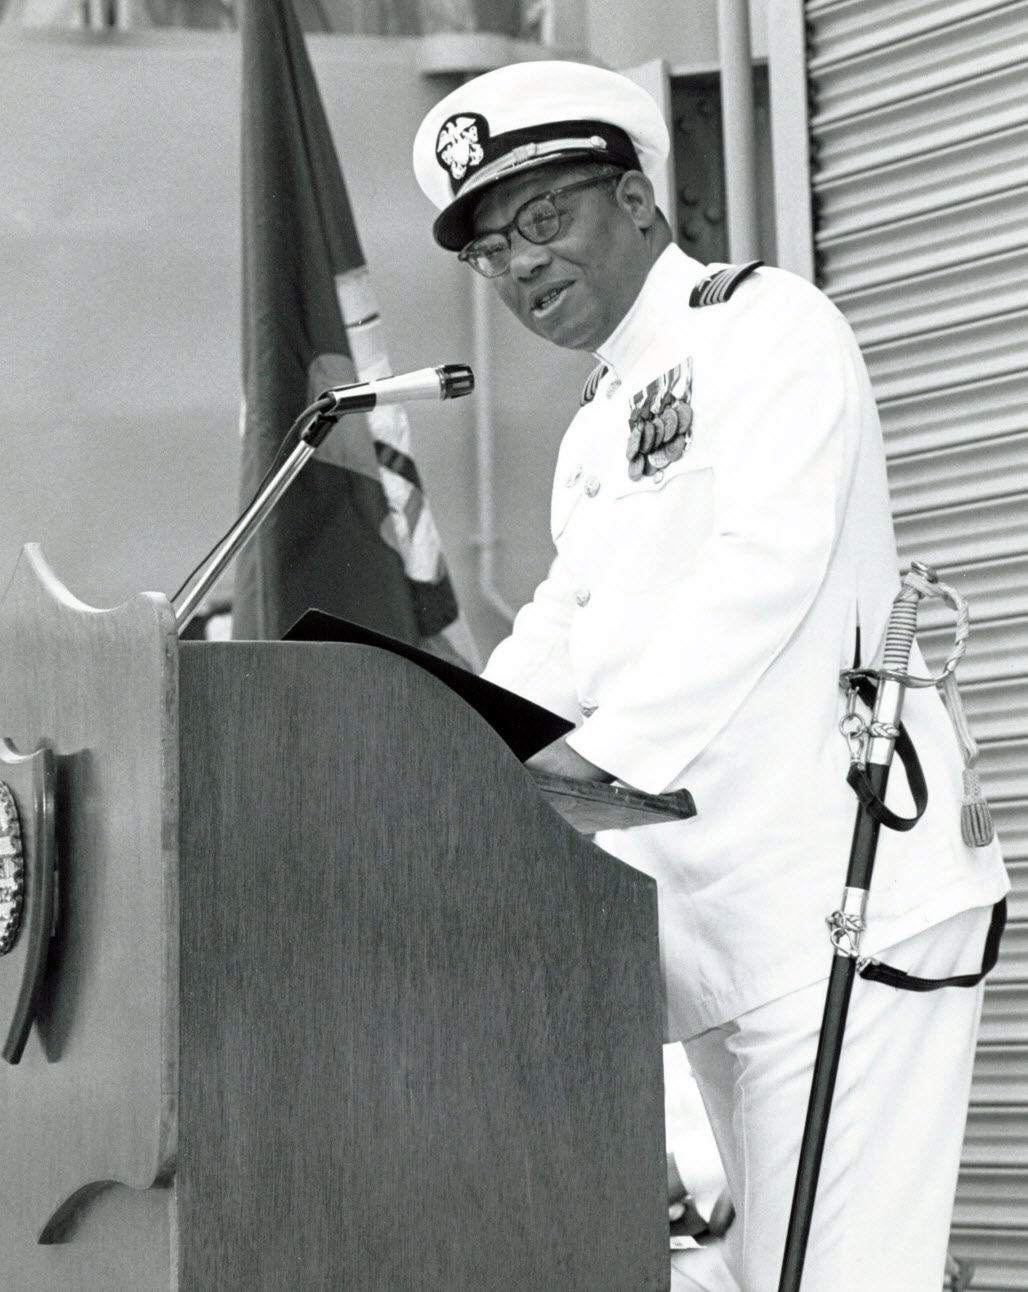 San Diego, Calif. (June 2, 1971) - Official U.S. Navy file photo of Capt. Samuel L. Gravely Jr., speaking at the ceremony marking his promotion to flag rank aboard USS Jouett (DLG 29) at San Diego, Calif. Retired Vice Adm. Gravely passed away on Oct. 22, 2004. He was the first African-American to be selected to the rank of admiral and the first to command a Navy warship. U.S. Navy photo. 